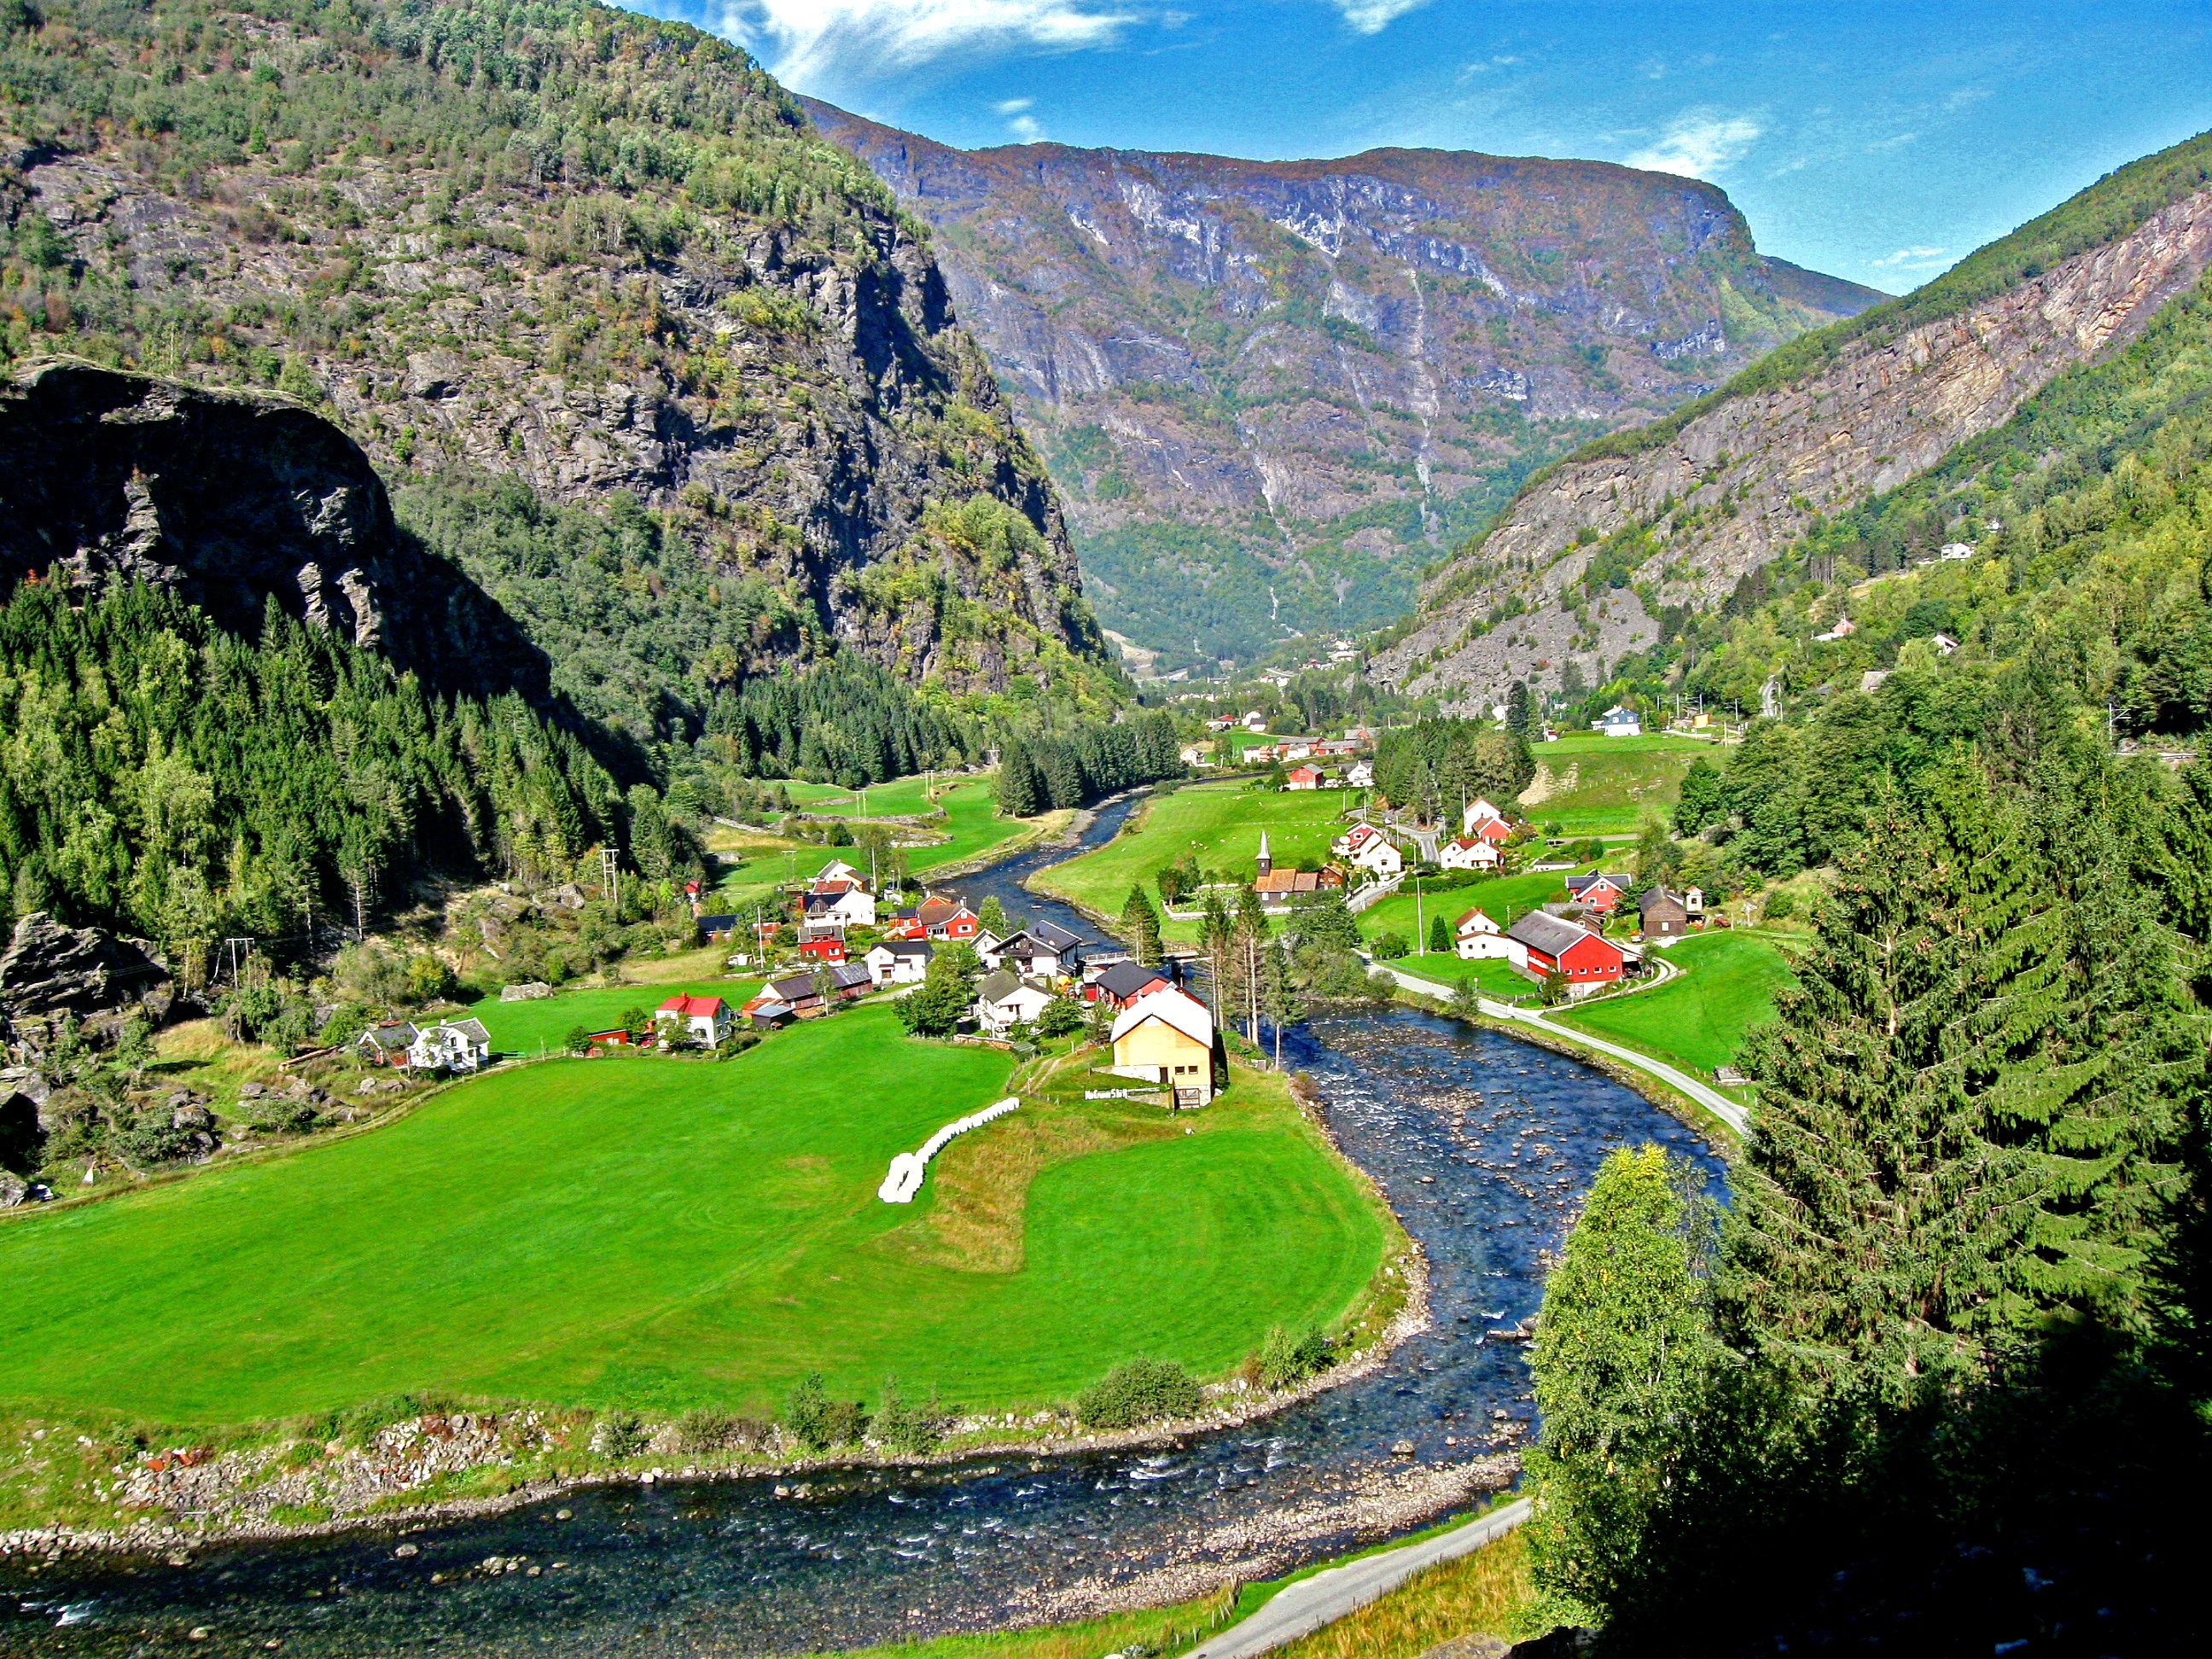 The train ride to Flåm, Norway